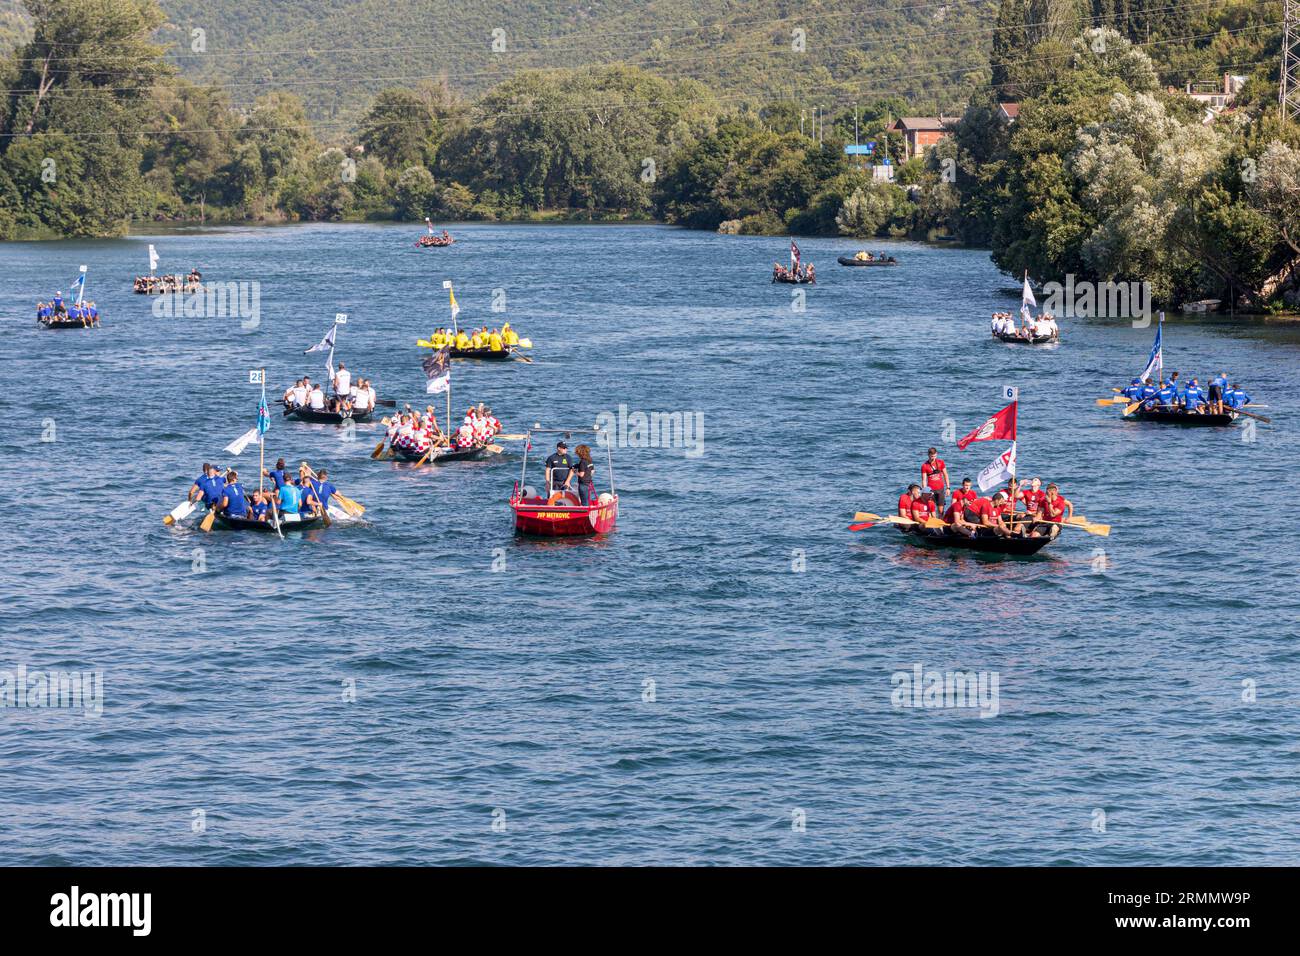 Metkovic, Neretva race, 'Ladja Competitions' Banque D'Images